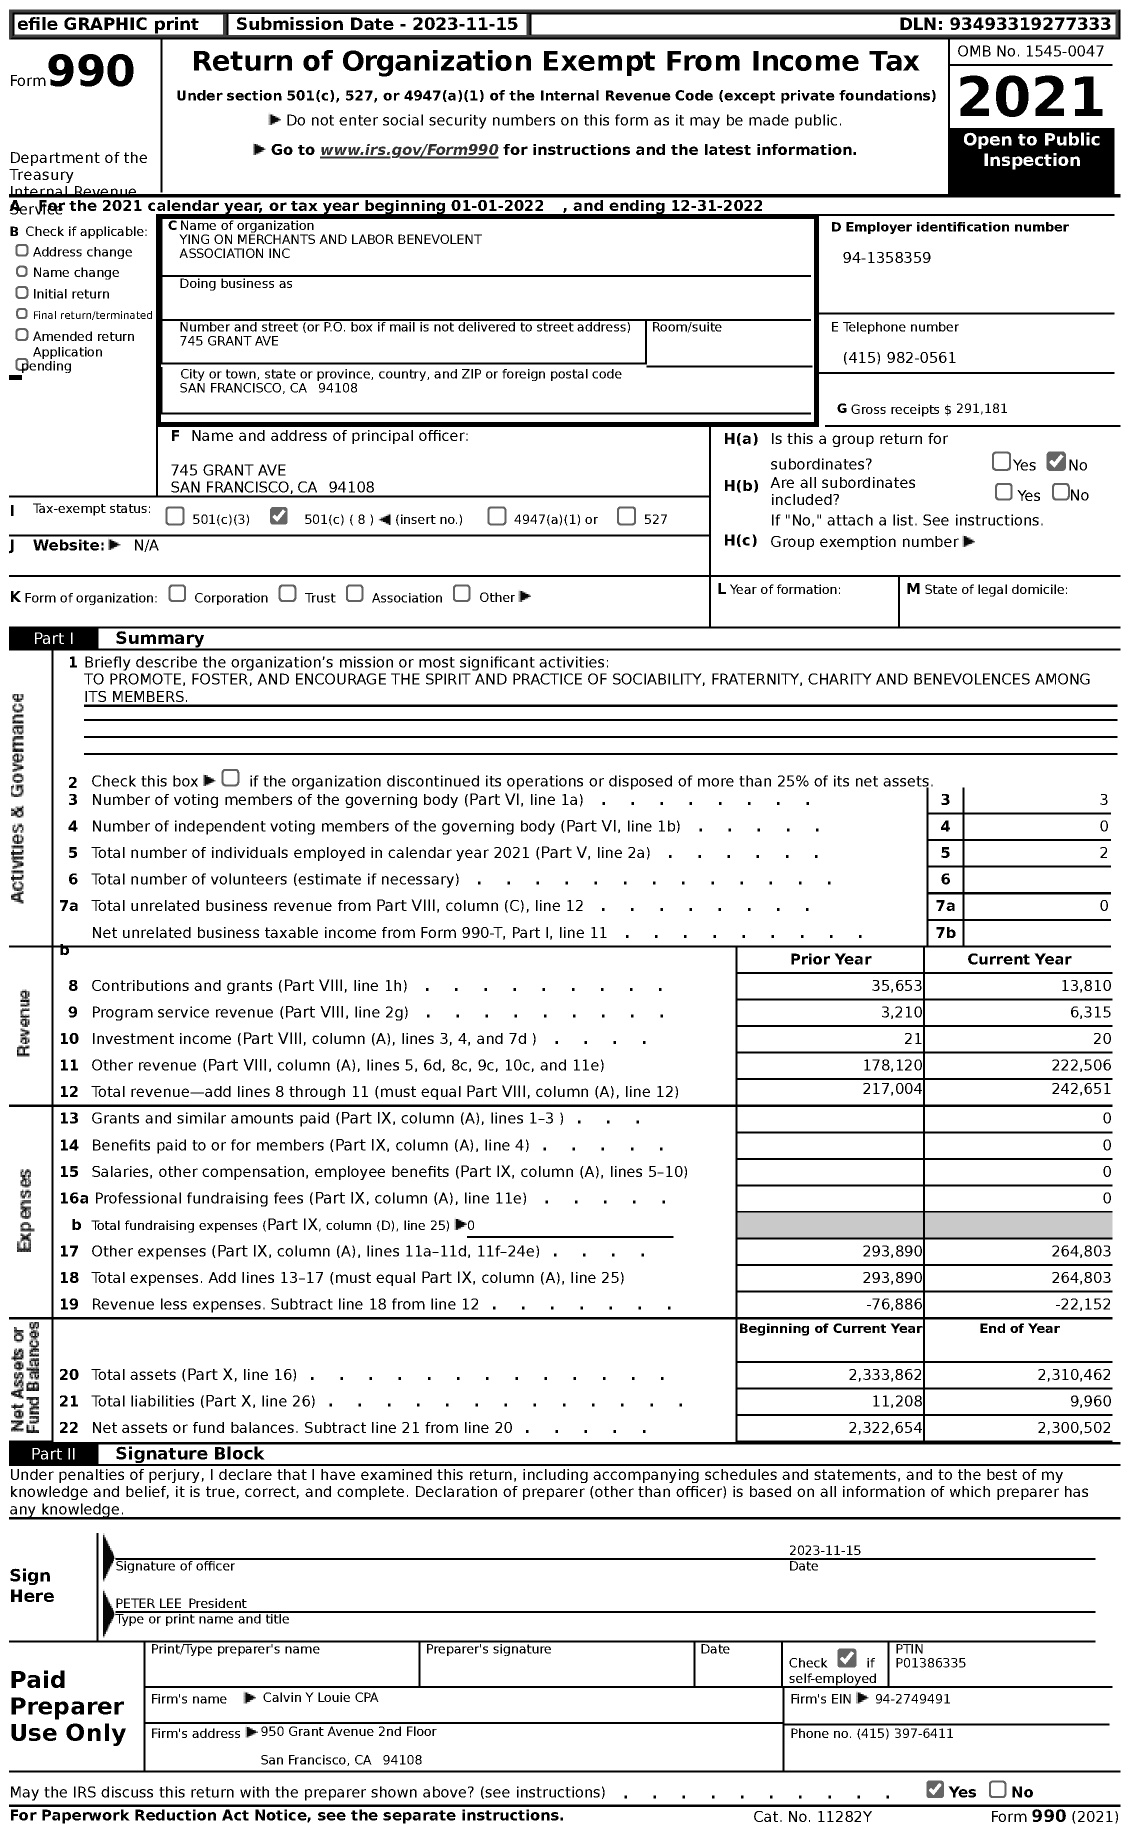 Image of first page of 2022 Form 990 for Ying on Merchants and Labor Benevolent Association